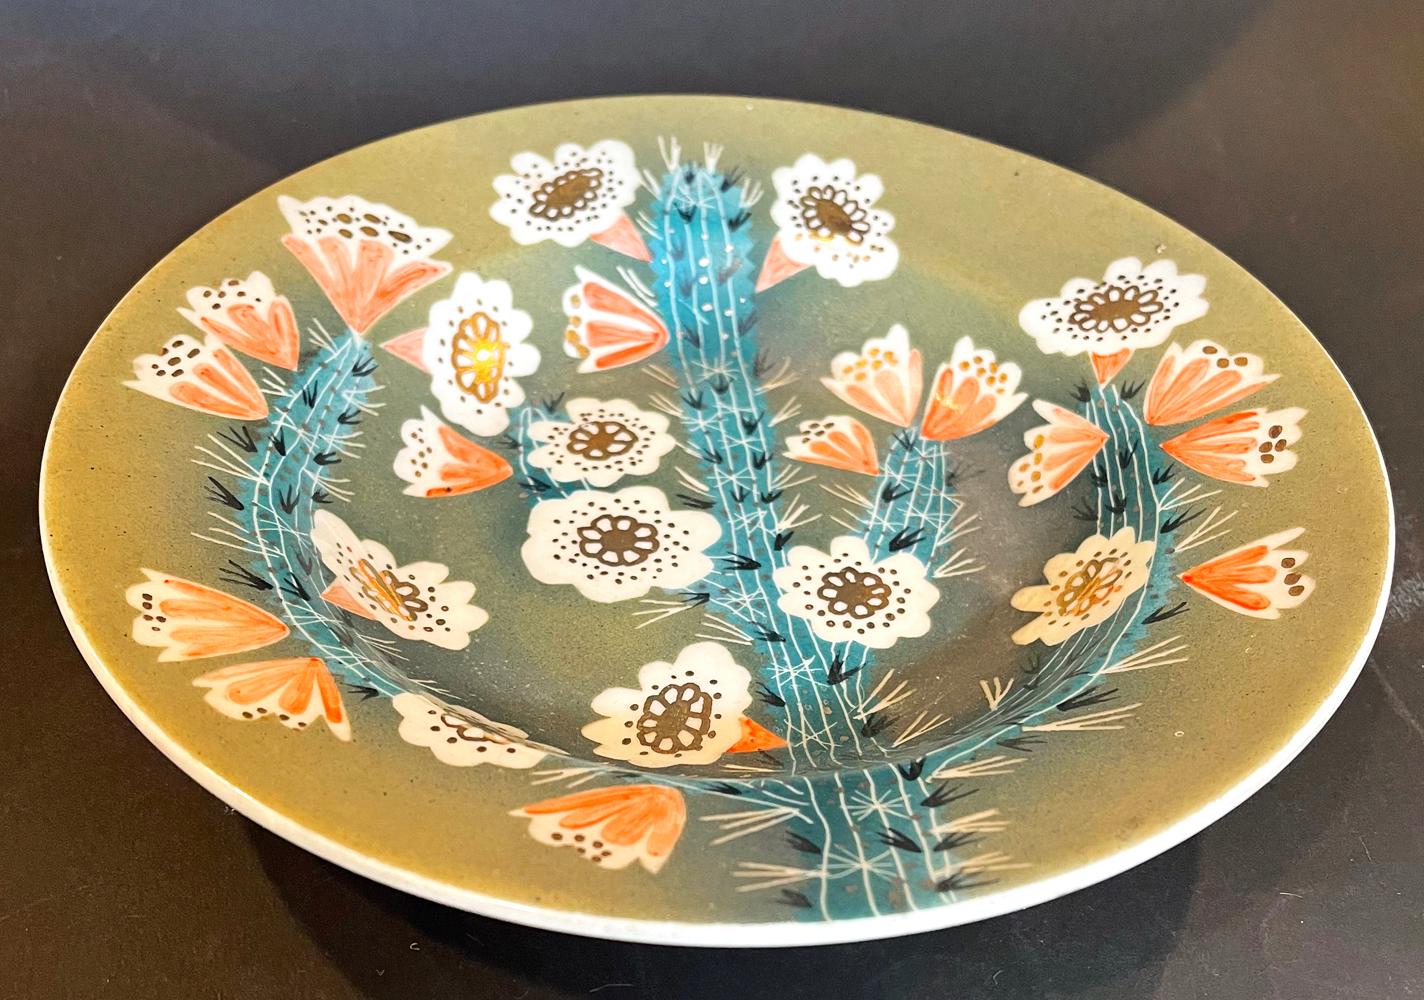 Beautifully glazed in tones of mossy green, papaya, ivory and blue topaz, this bowl by Waylande Gregory depicts a cactus laden with brilliant blossoms. Gregory was one of America's greatest sculptors and ceramicists before and after World War II. He